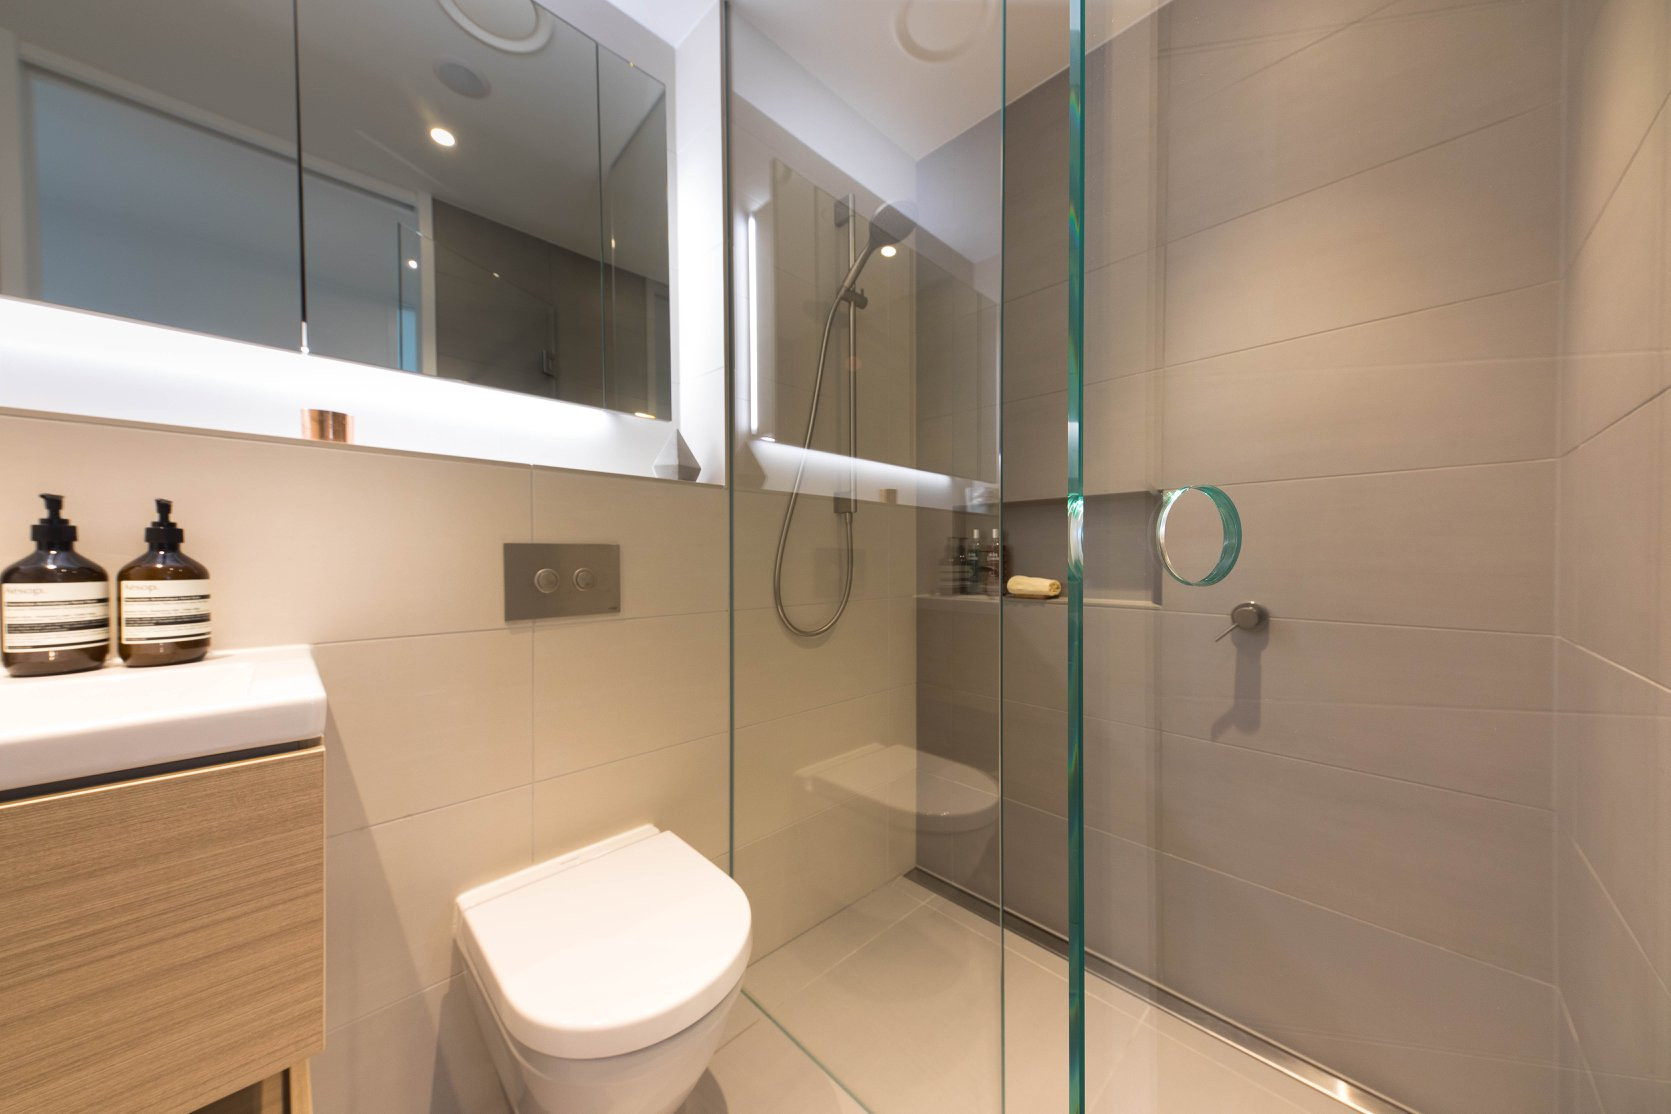 Contemporary bathroom design with a clear glass shower enclosure, toilet, and sink